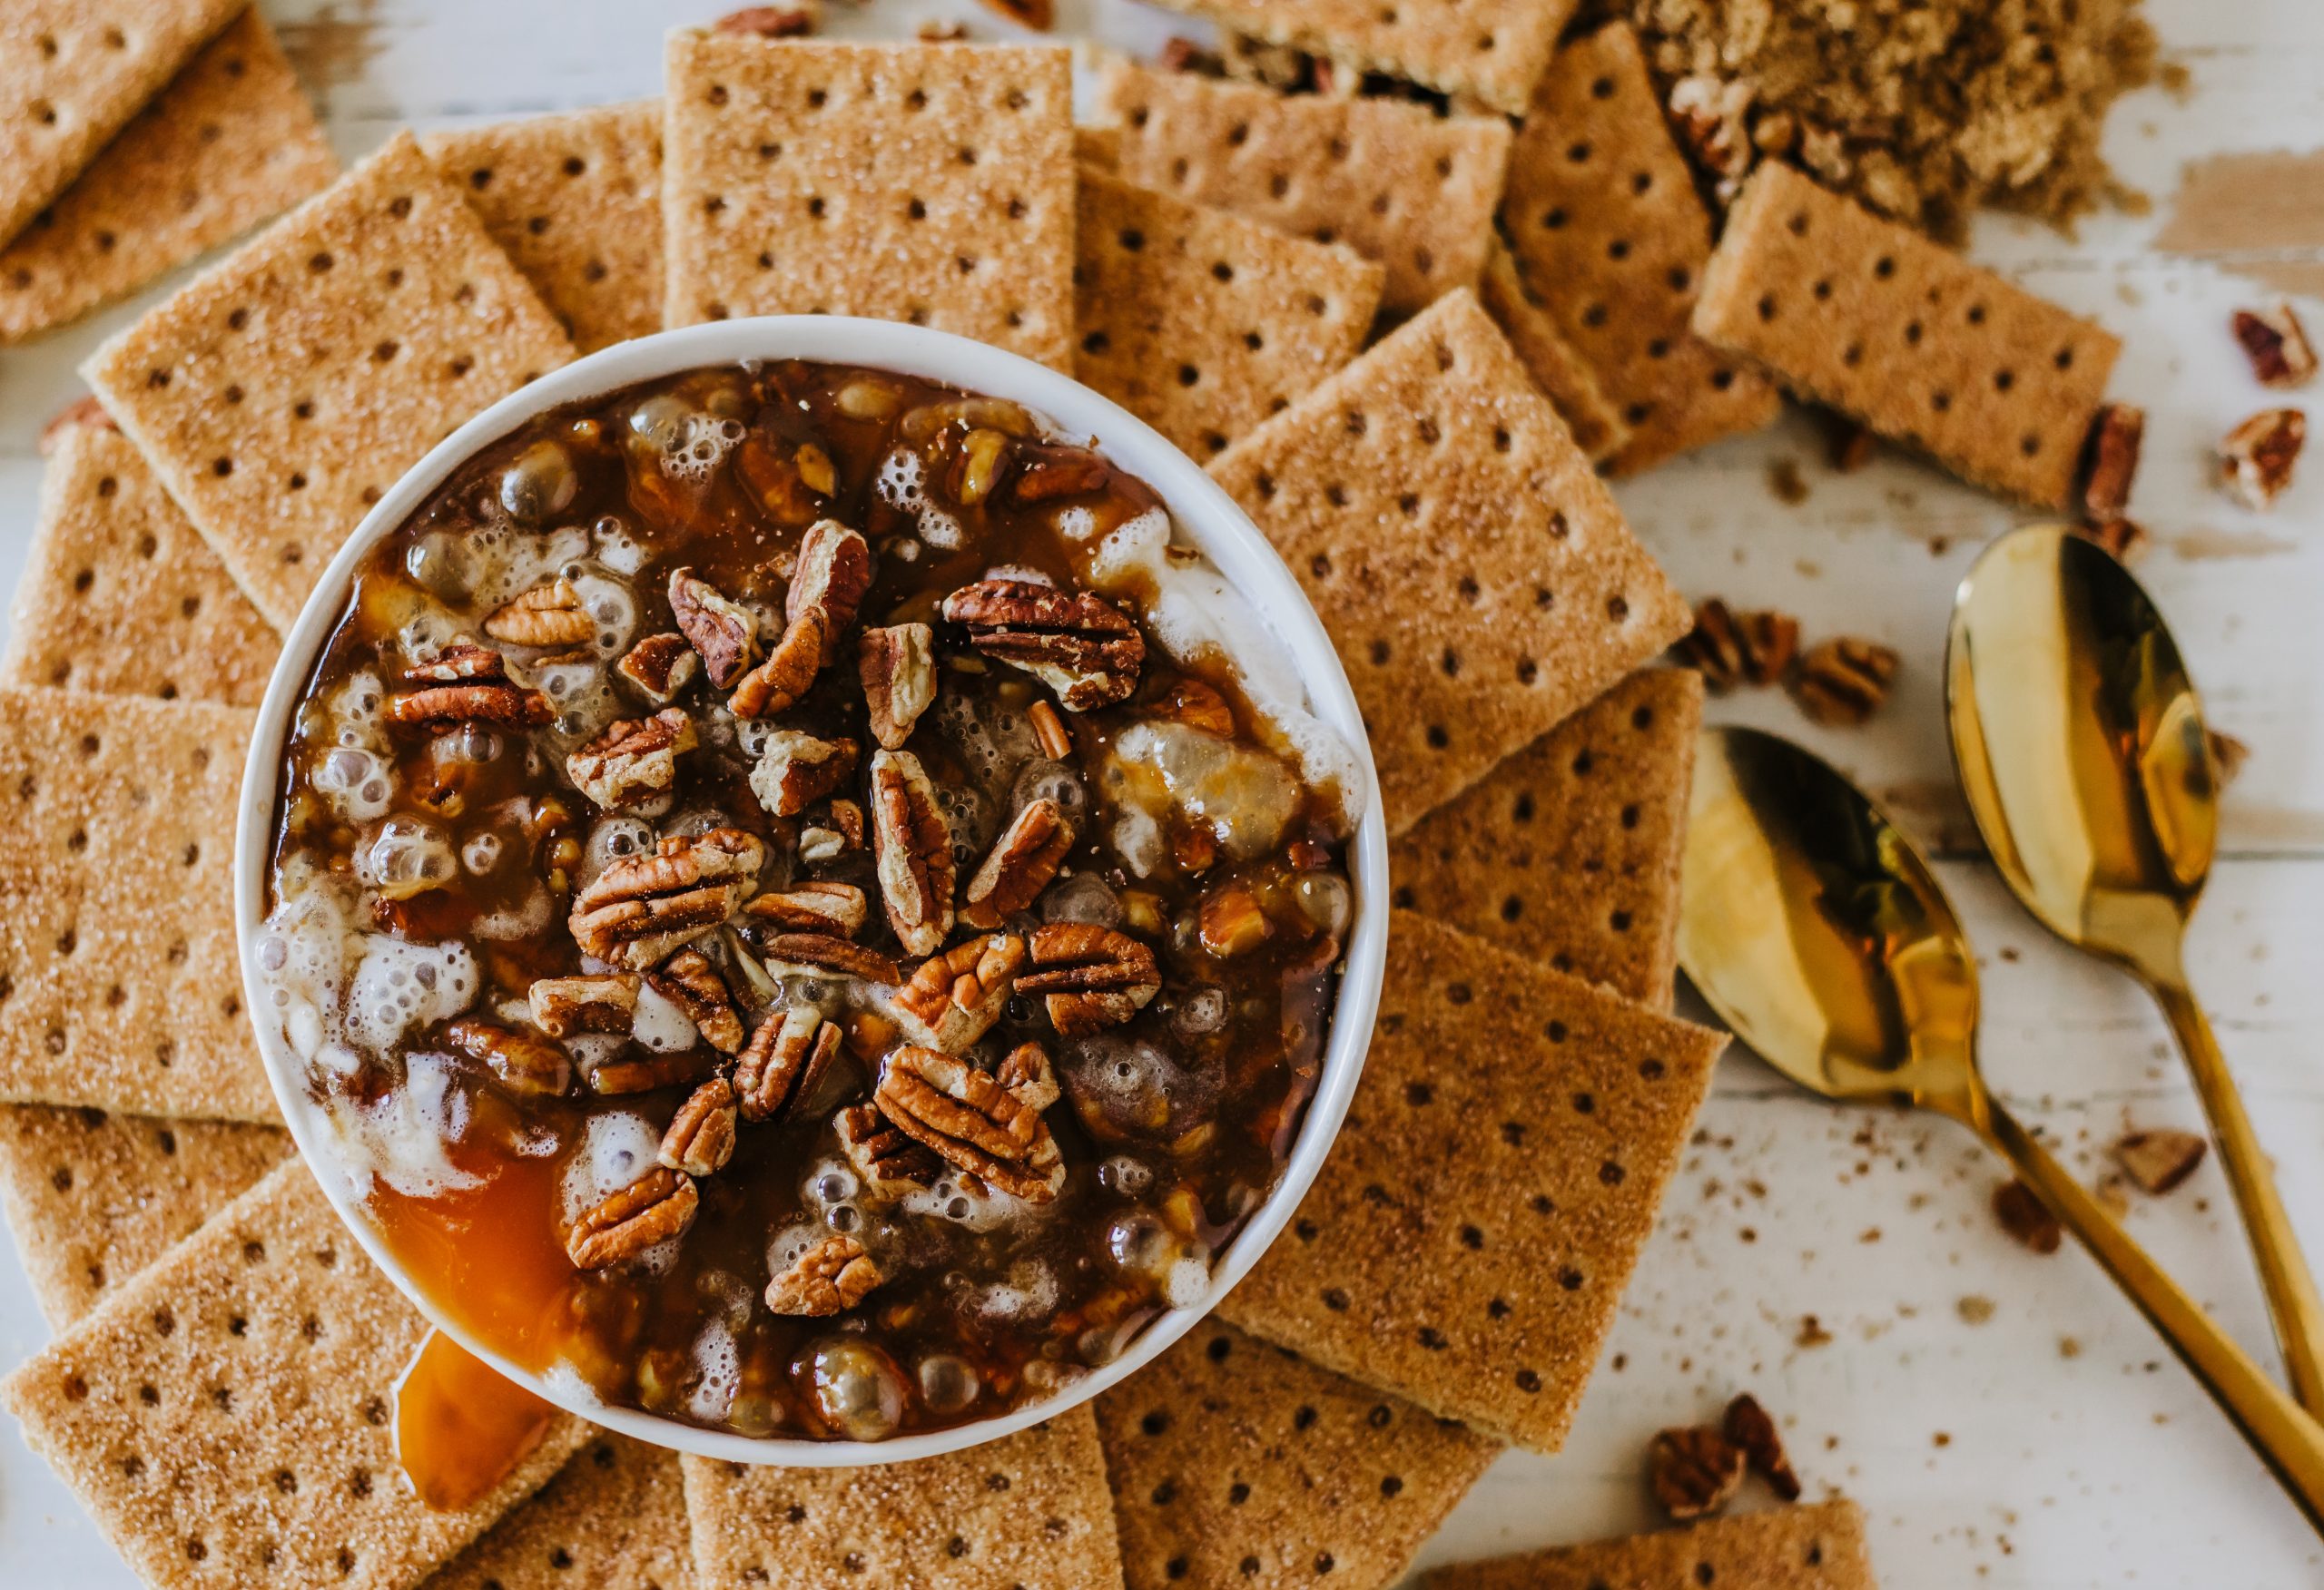 A bowl filled with pecan-topped dessert surrounded by graham crackers. Two gold spoons are placed to the right.